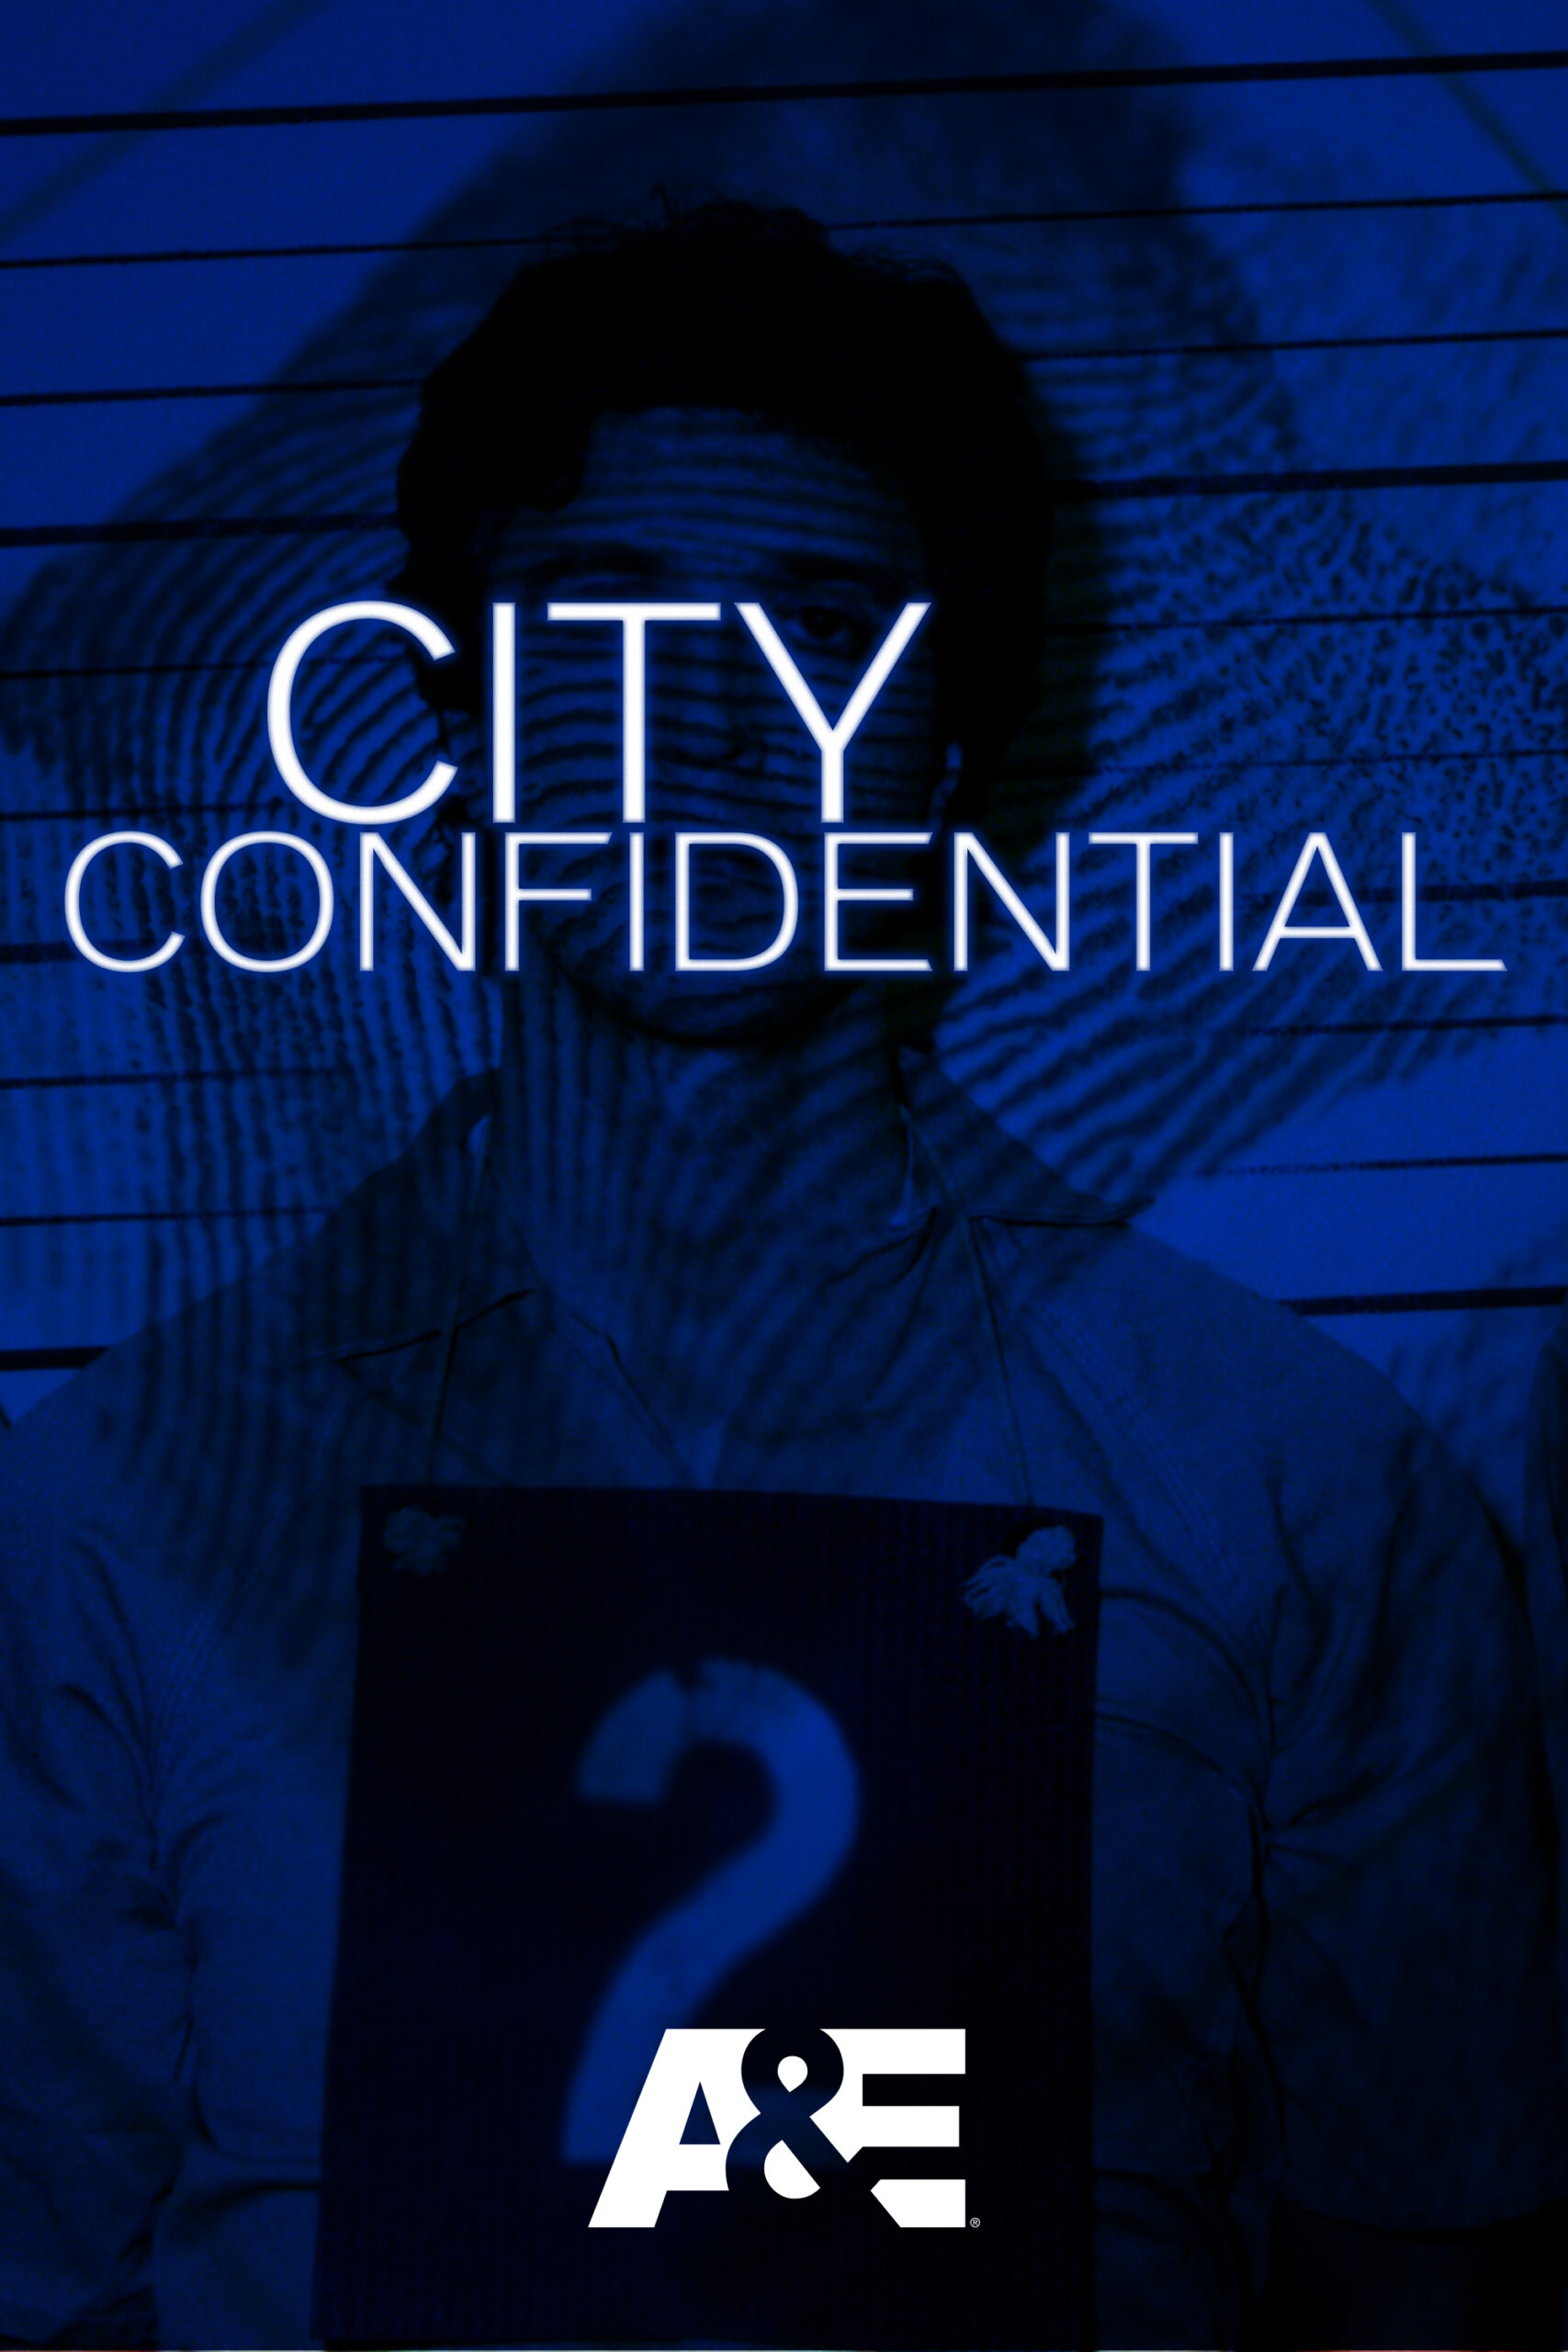 Where to watch City Confidential Season 7